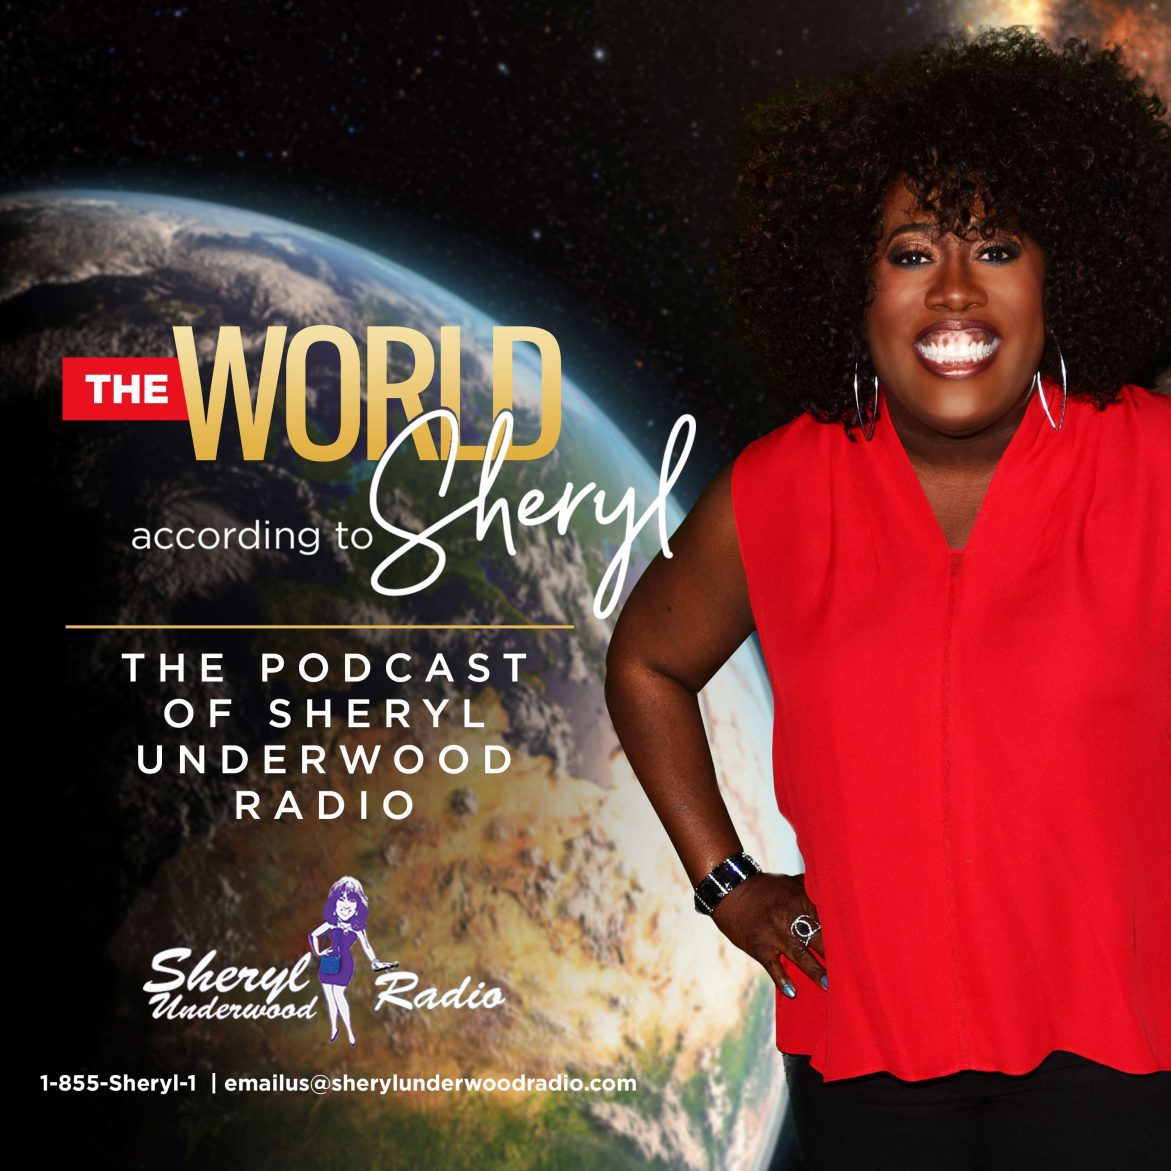 Black Podcasting - Sheryl Underwood Podcast: "Wear What You Want"